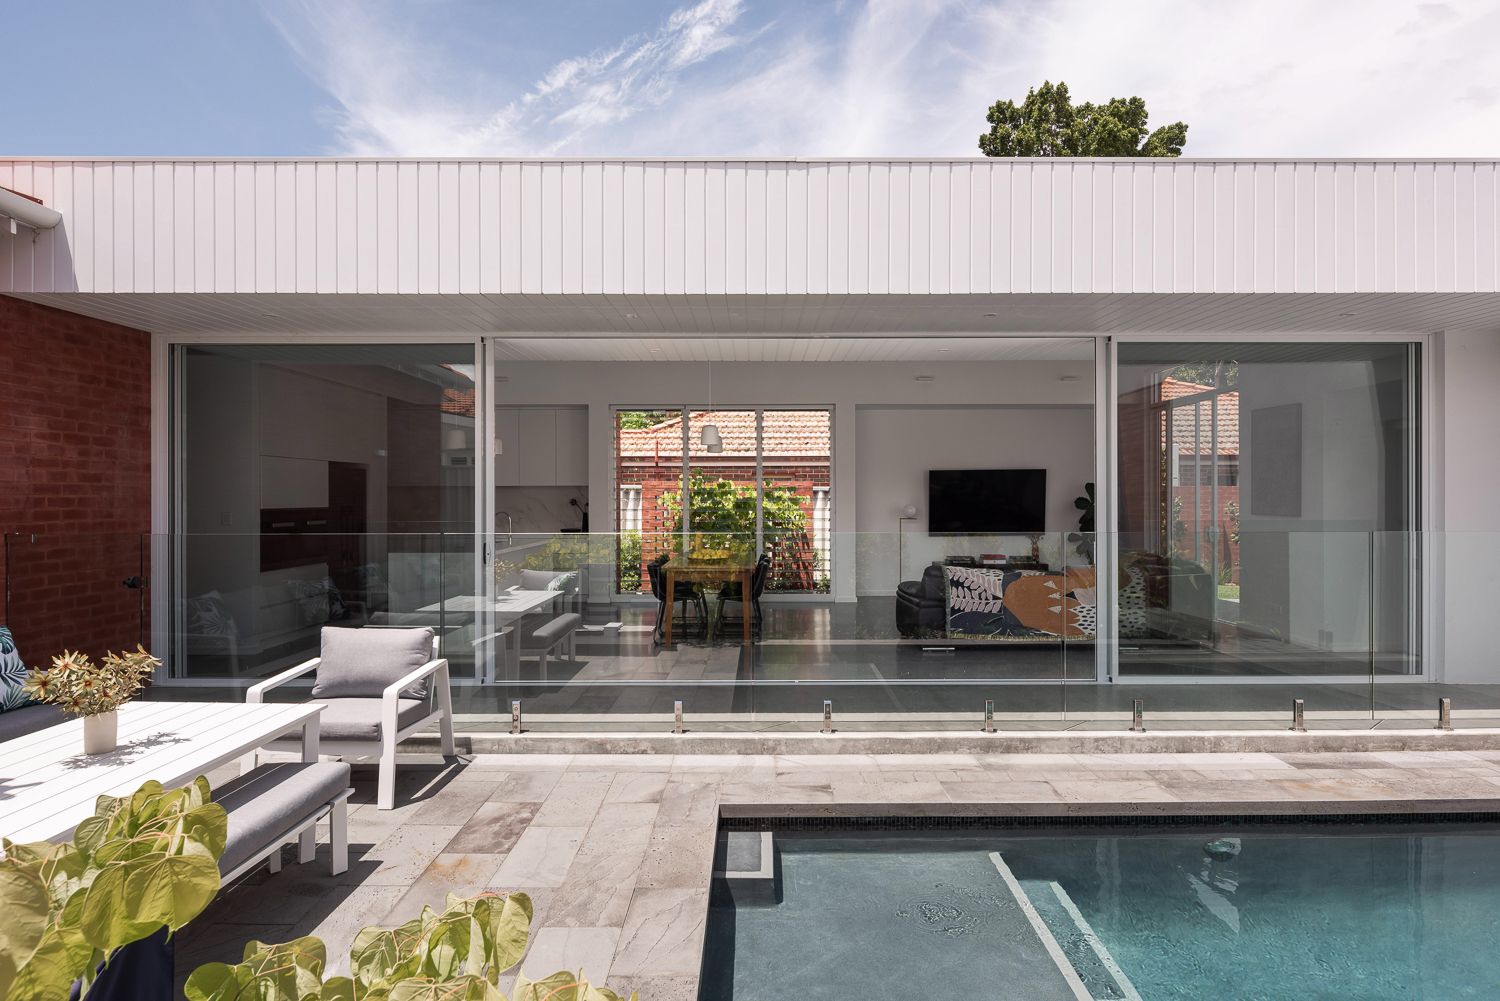 Inglewood House by Robeson Architects. Exterior rear facade of modern residential property with outdoor entertaining area and pool.  